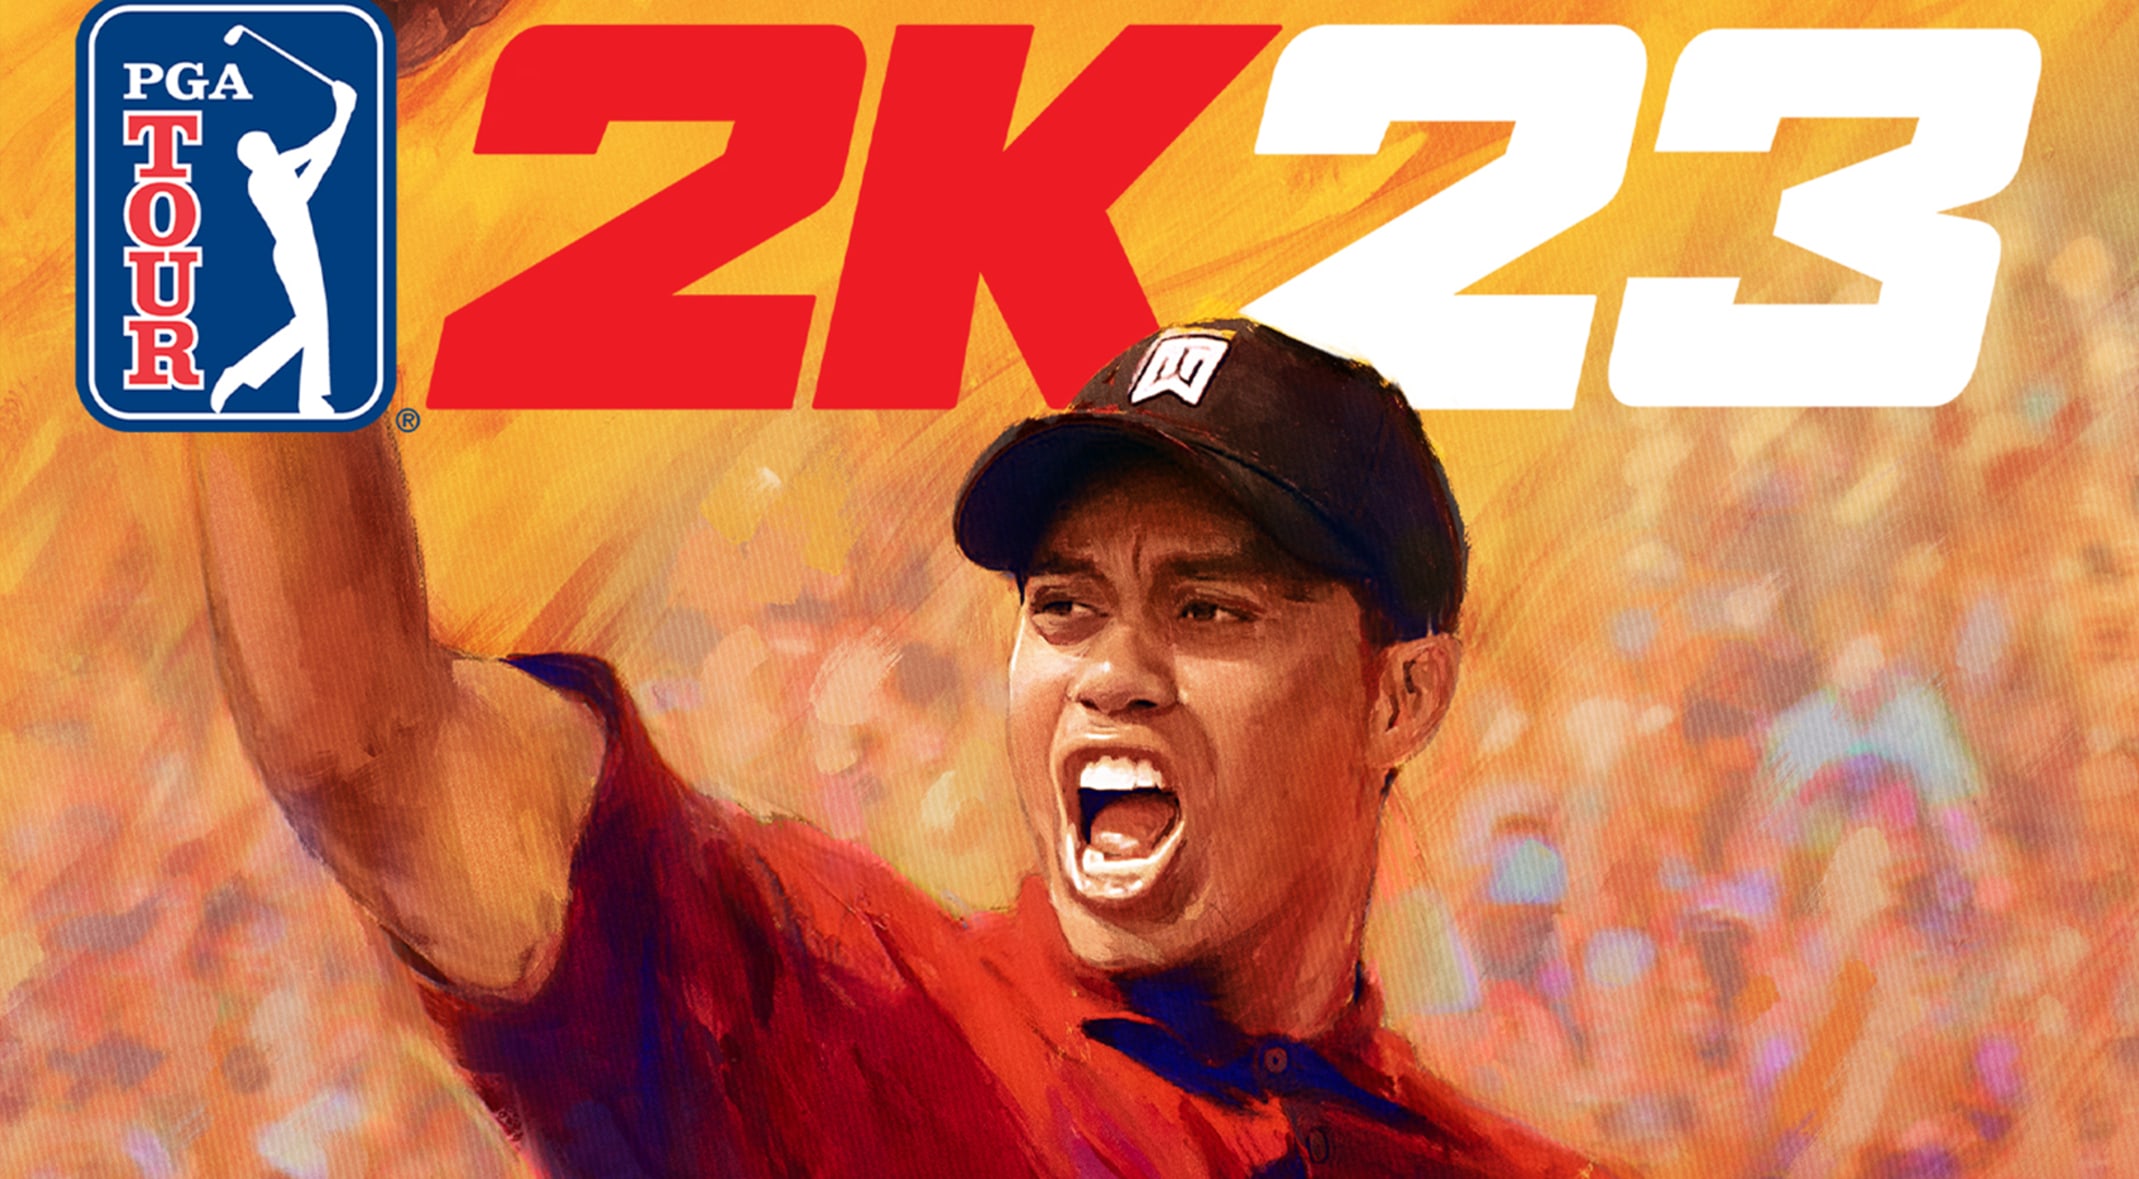 PGA TOUR 2K23 brings “More Golf. More Game.” with the iconic Tiger Woods